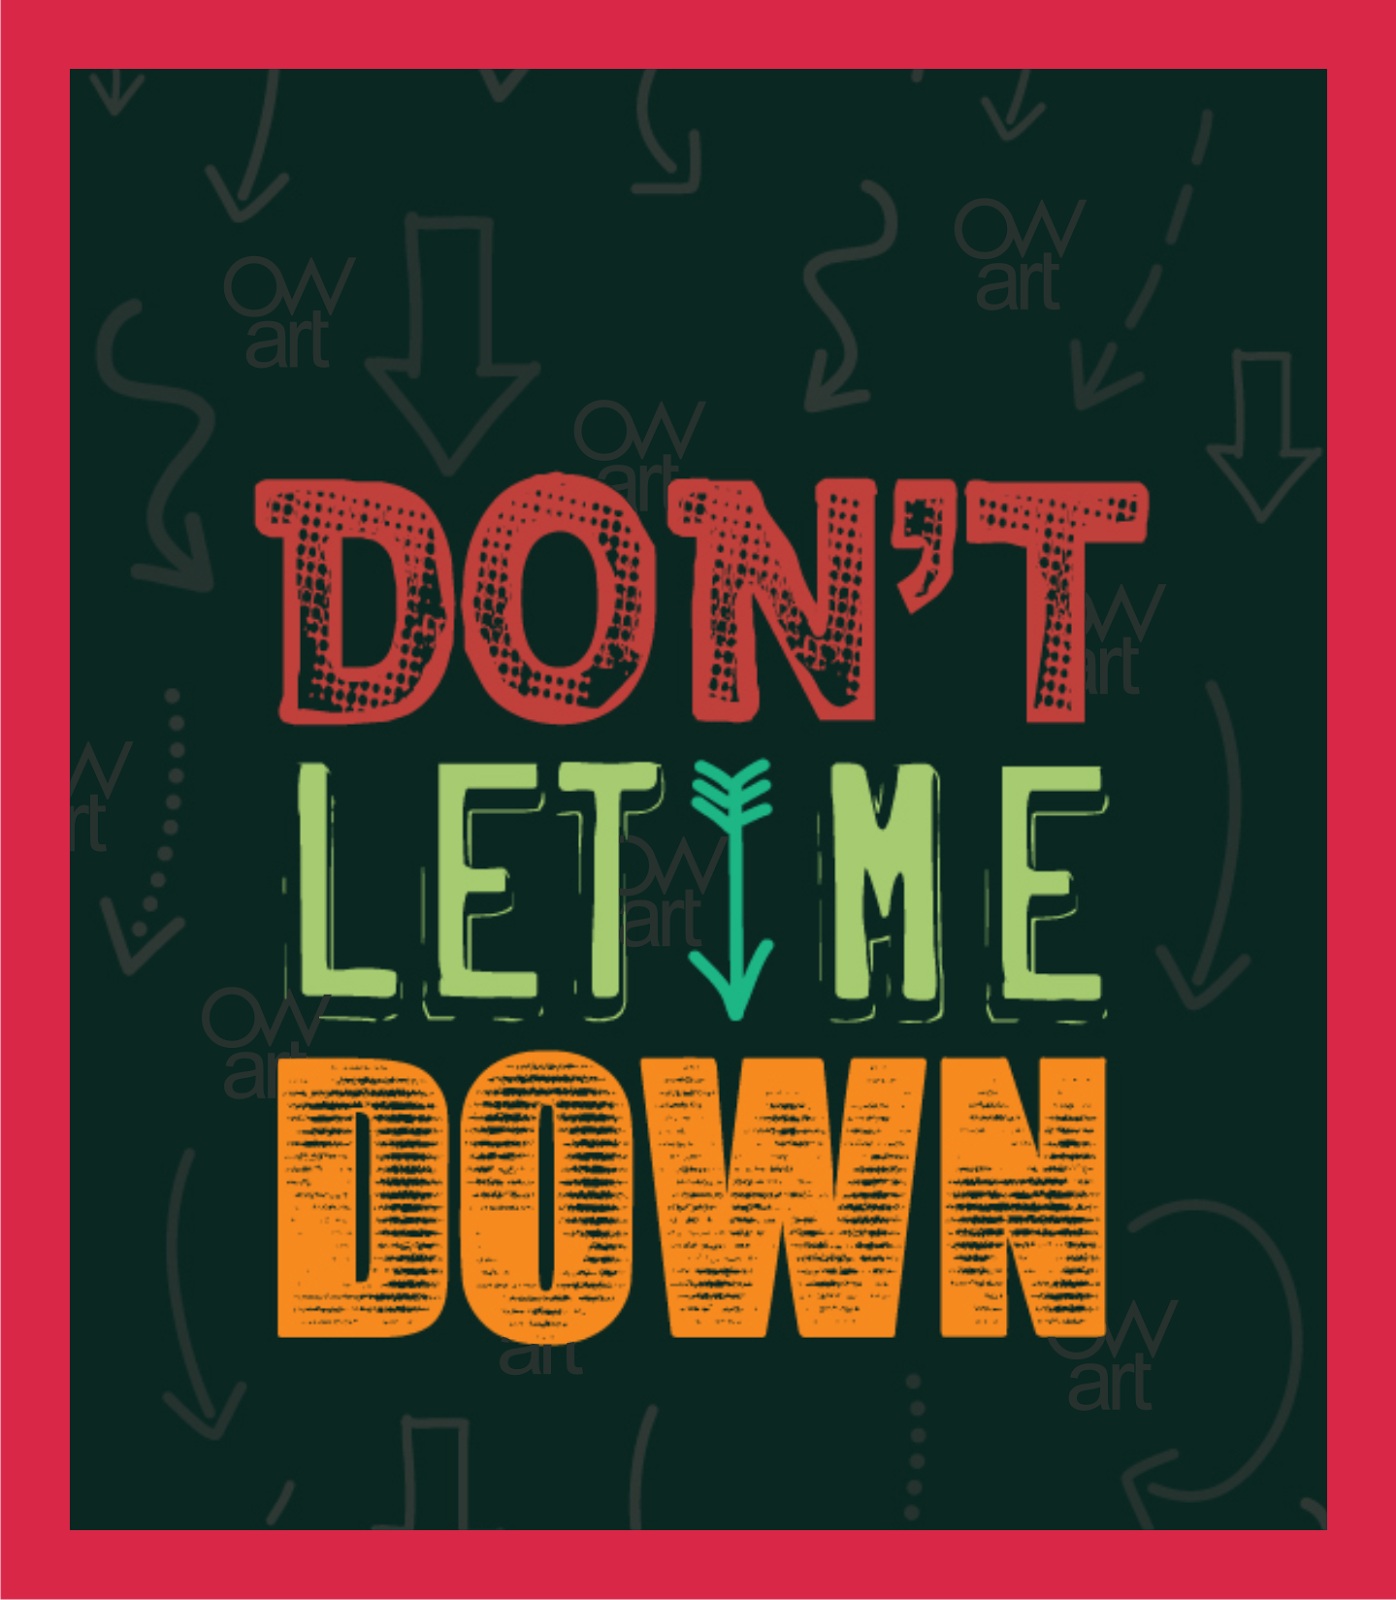 Dont me down. Don't Let me. The Chainsmokers Daya don't Let me down. Don't Let me down обложка.